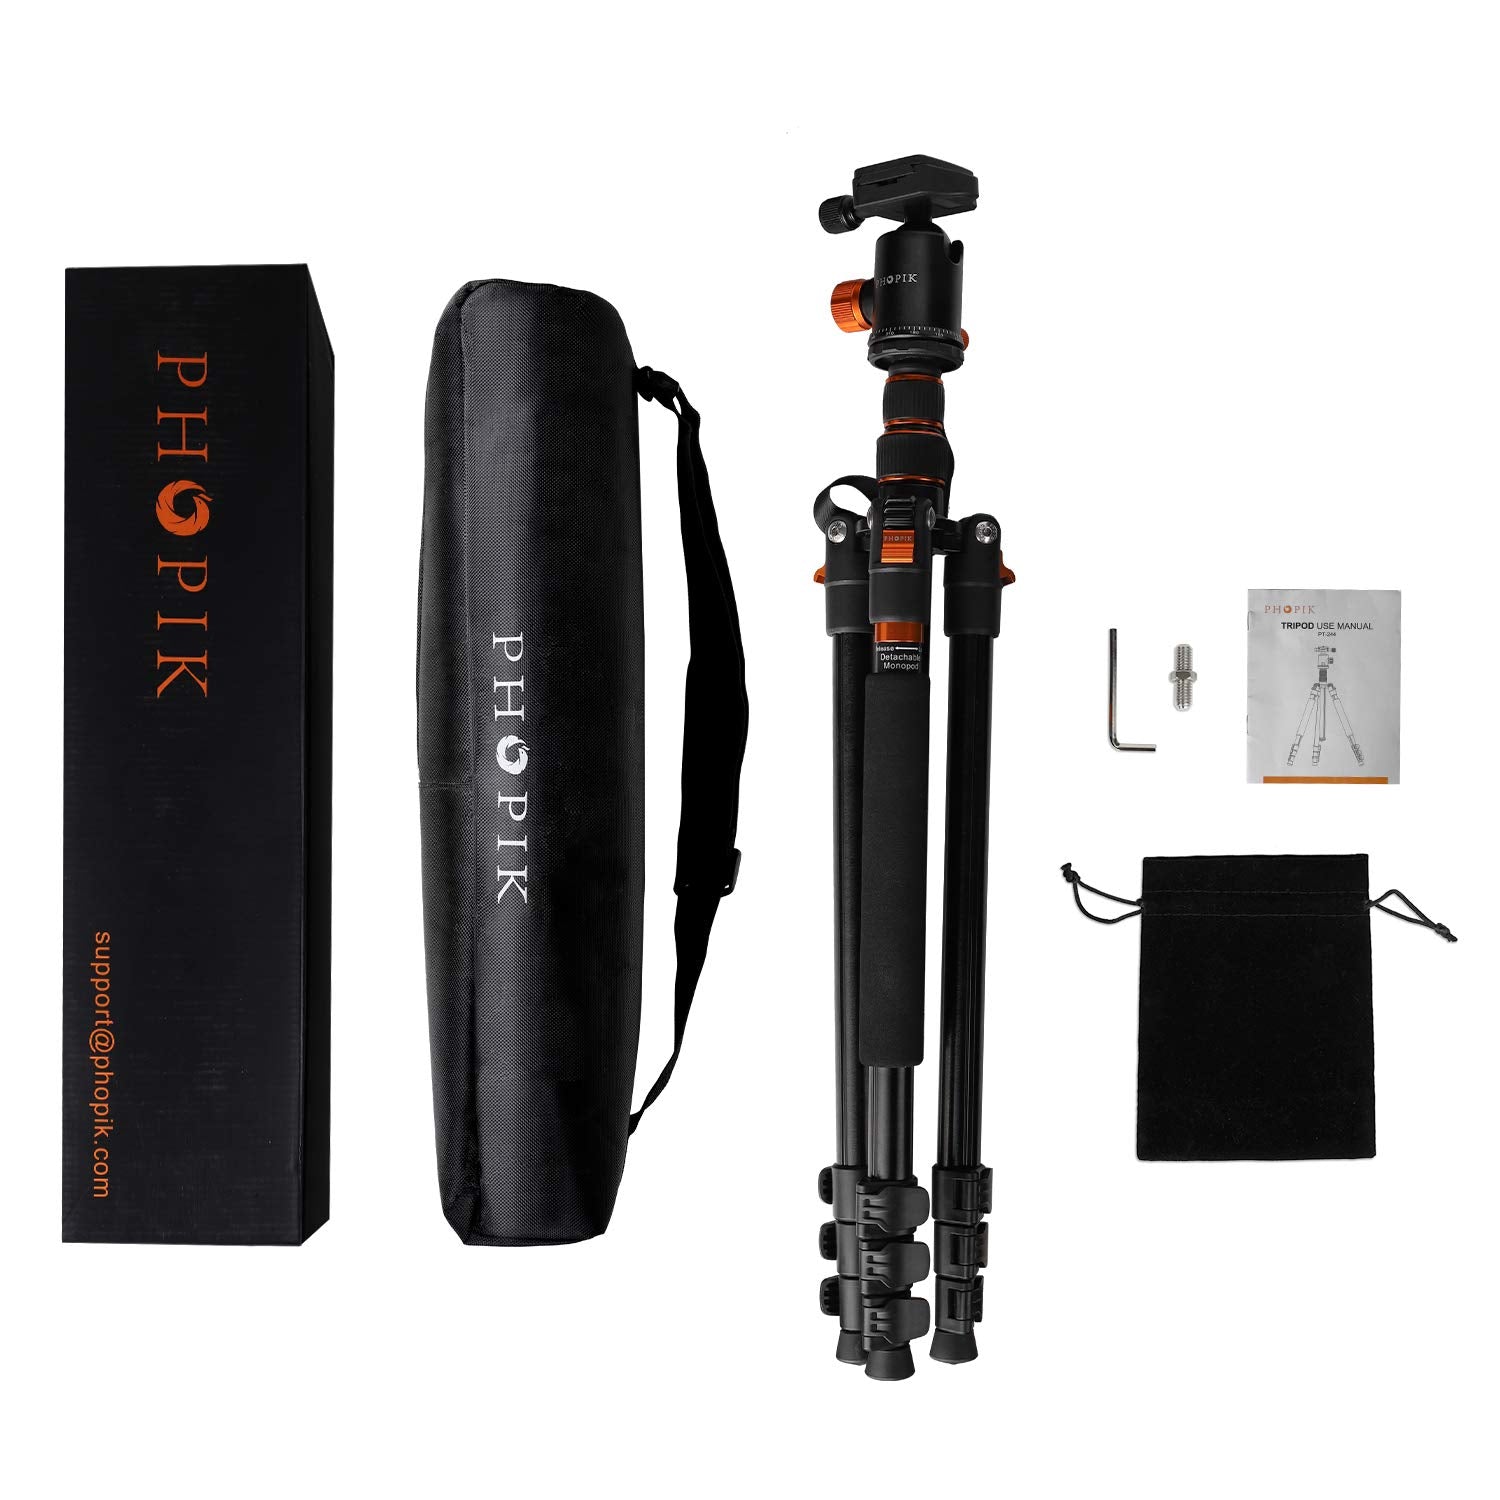 PHOPIK 77 Inches Tripod, Lightweight Aluminum Camera Tripod for DSLR, Photography Tripod with 360 Degree Ball Head 1/4" Aluminum Quick Release Plate Professional Tripod Load up to 17.6 Pounds